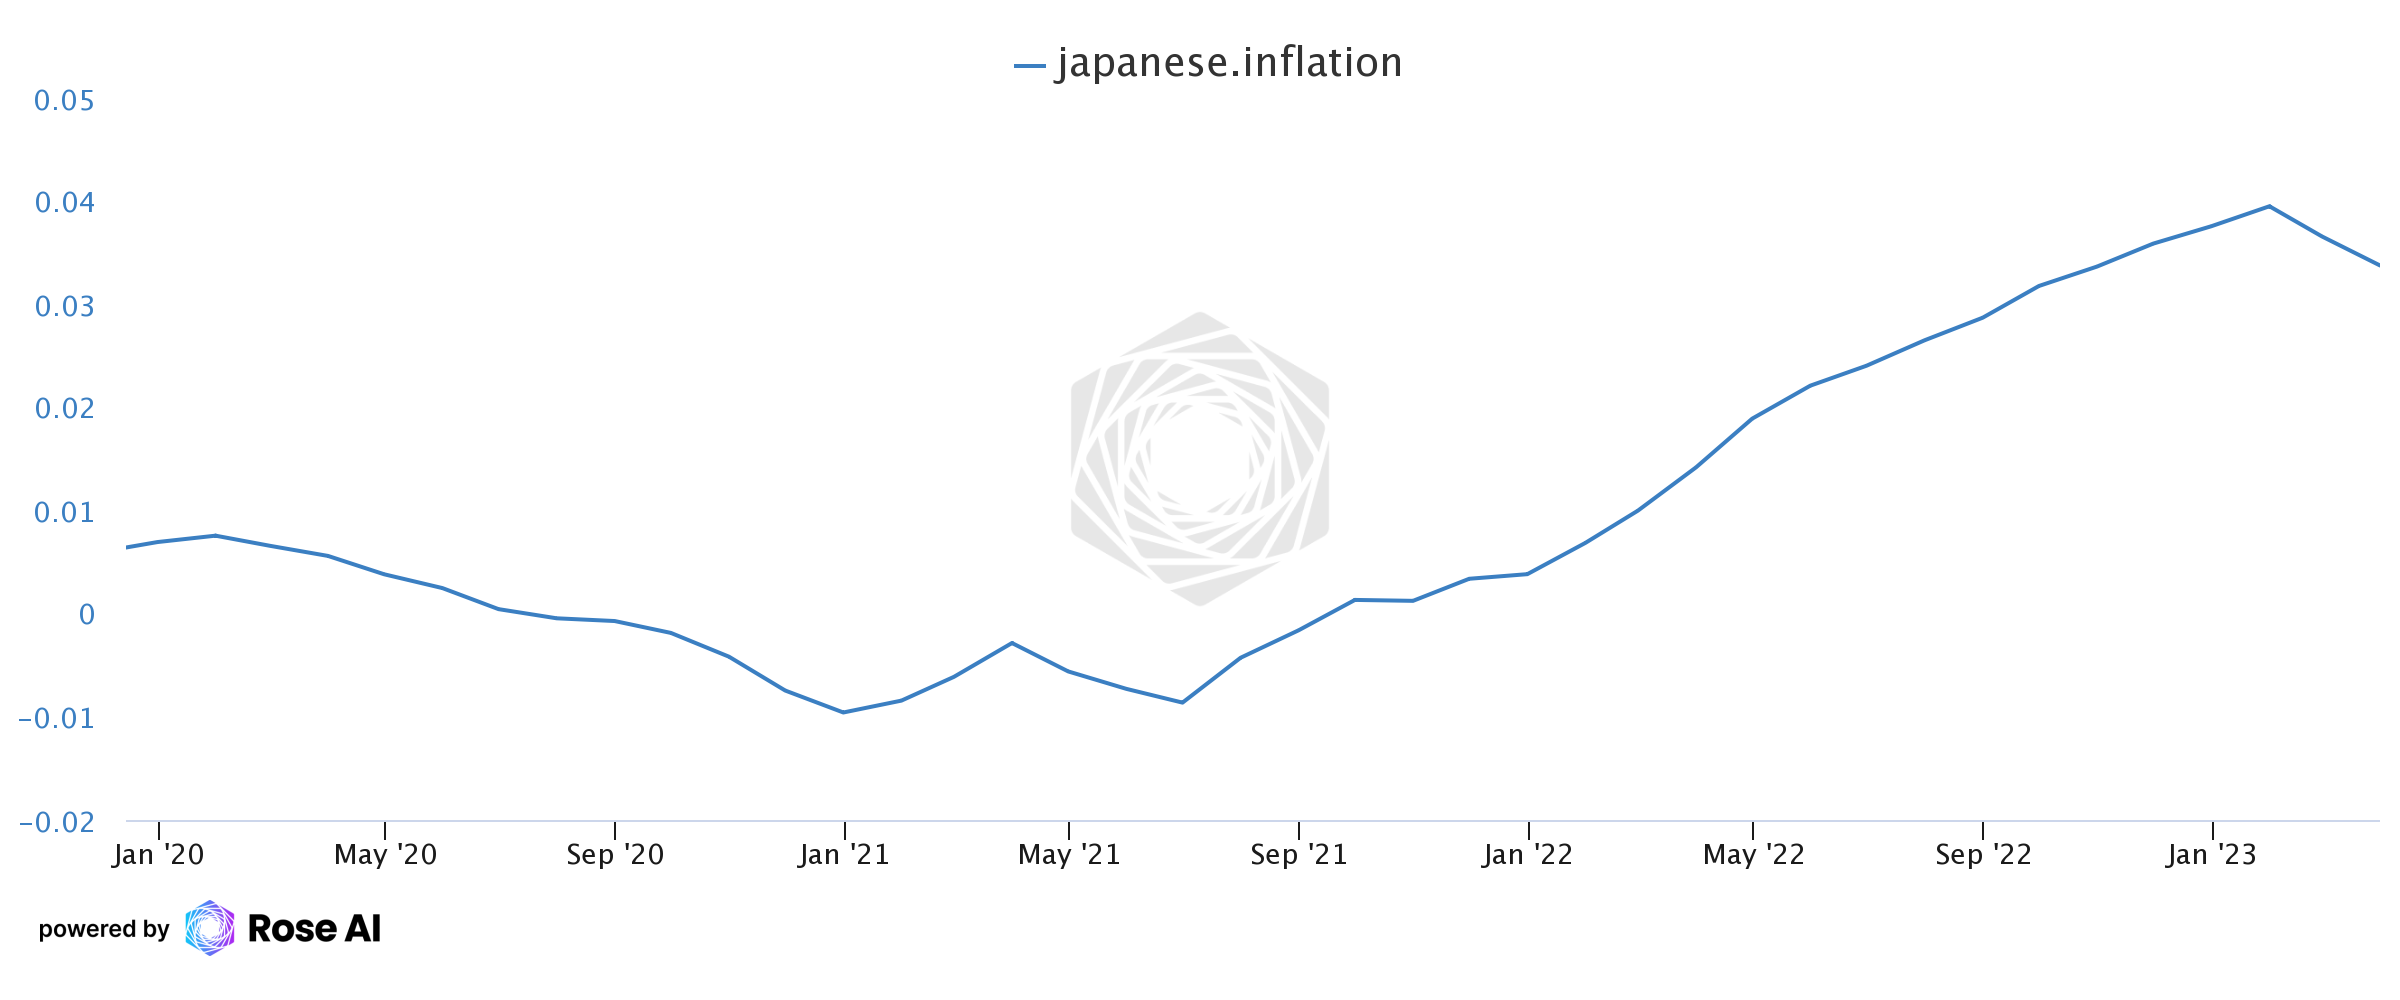 Japan's Inflation Surges to 3.5% as New BOJ Governor Takes the Helm